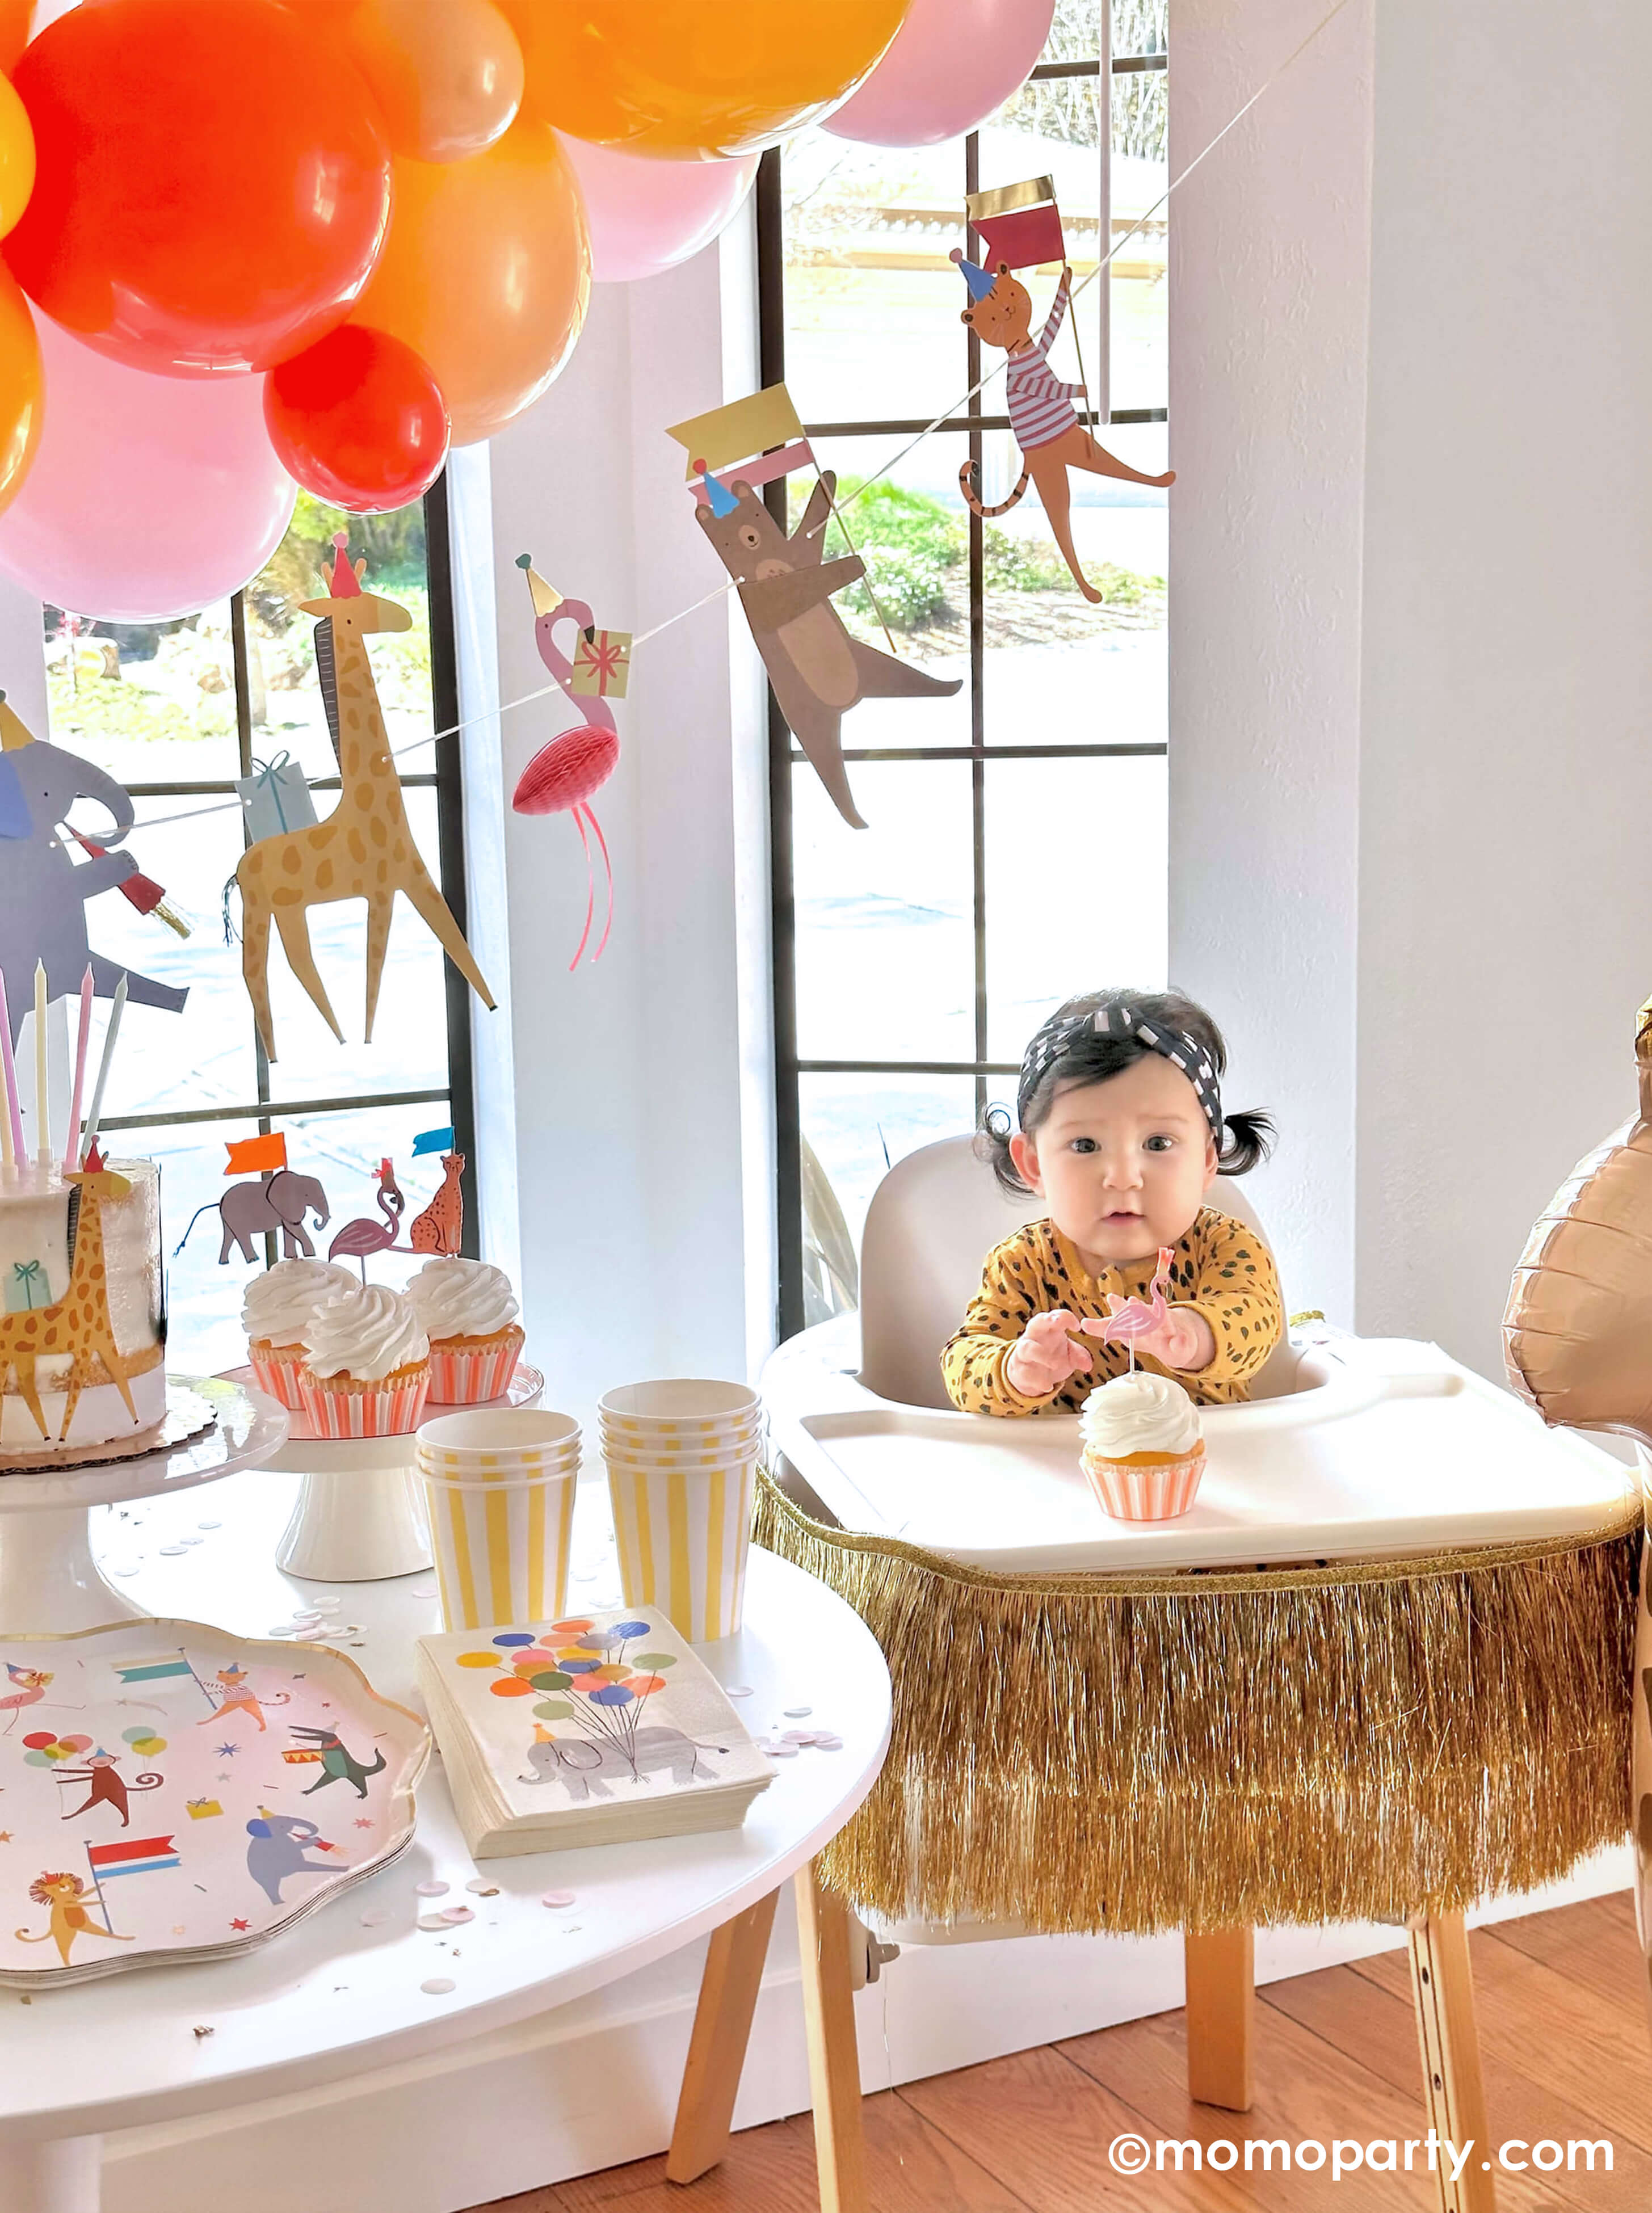 A cute baby girl wearing animal pattern onesie, sitting on a highchair in her 6 months animal themed half birthday party, reaching a cupcake decorated with Meri Meri Safari Animals Cupcake Kit, next to a party table featuring Momo Party's Animal Parade Dinner plate, Rifle Paper Co's party animal guest napkins, a cake decorated with  , along with light yellow striped cups and yellow wooden utensil.  it makes a great party inspiration for kid's animal, safari, carnival themed birthday party.